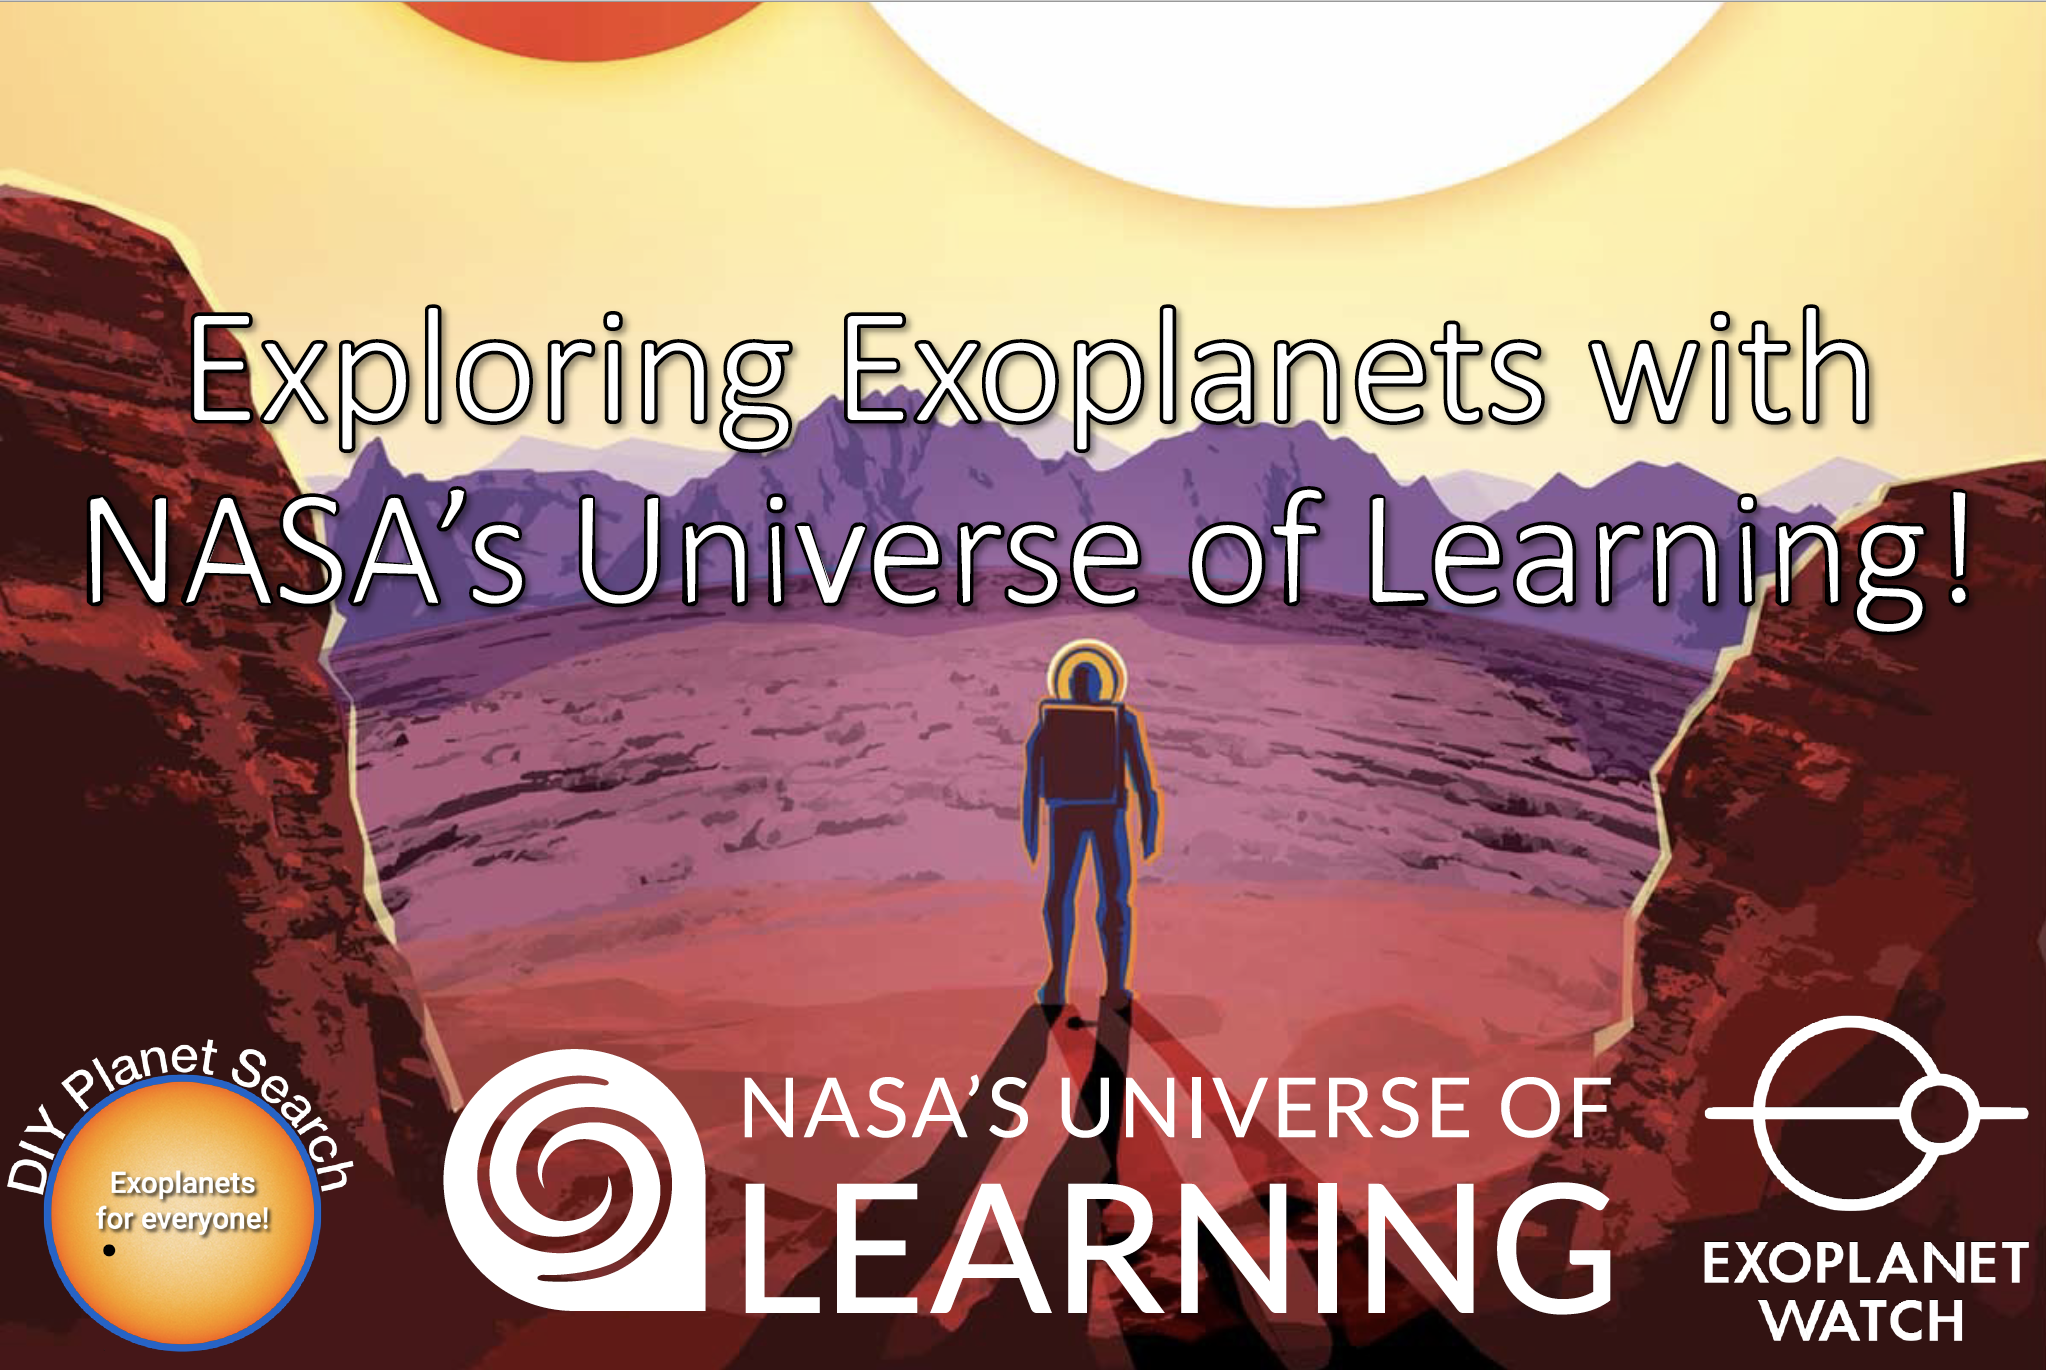 Exploring Exoplanets with NASA's Universe of Learning